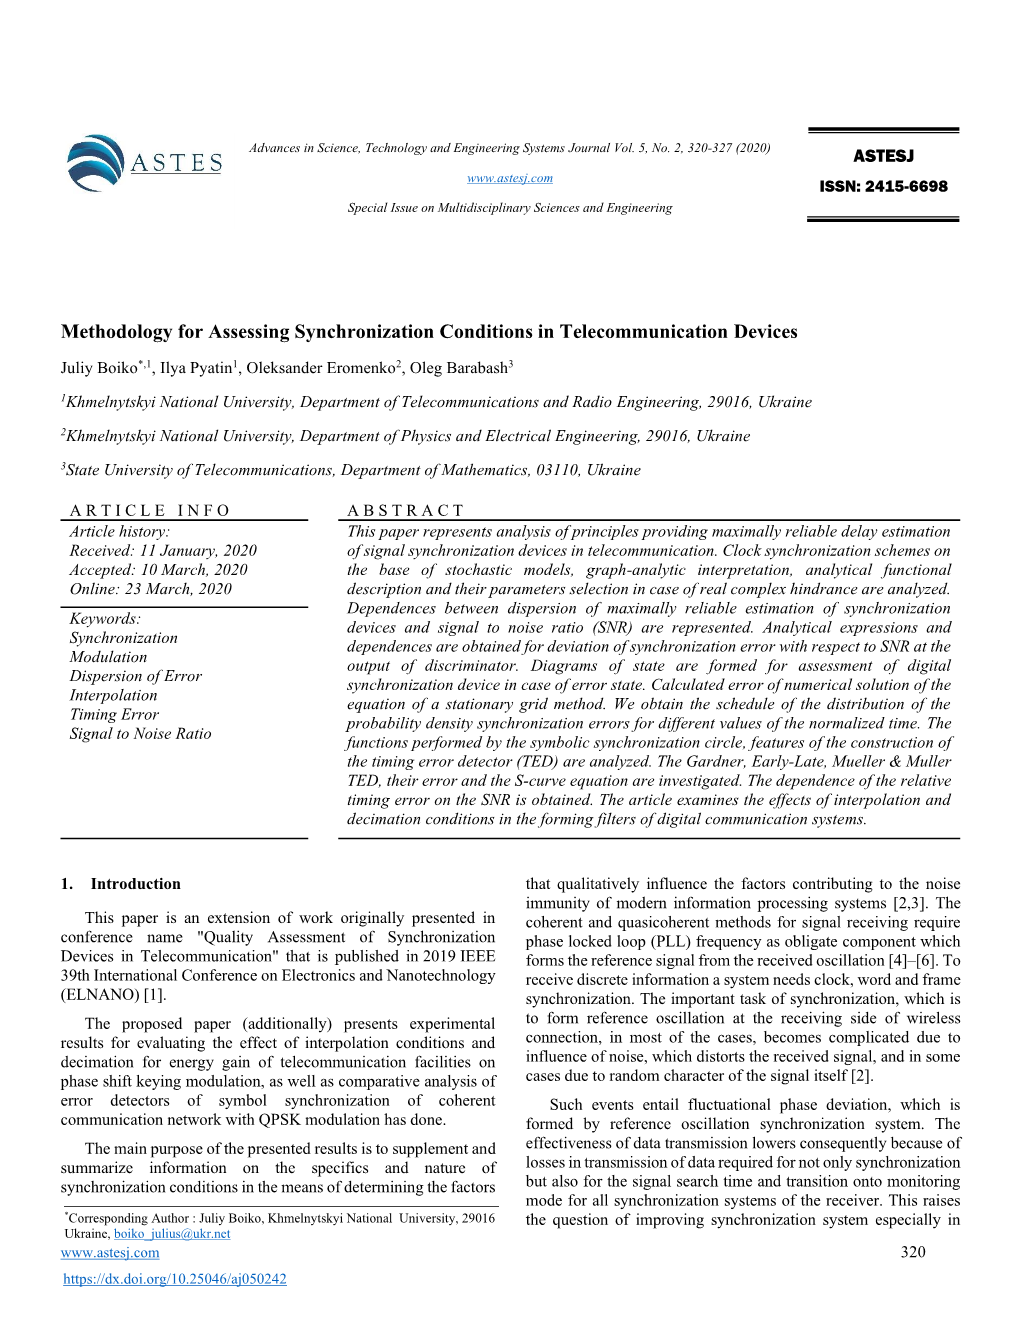 Methodology for Assessing Synchronization Conditions in Telecommunication Devices